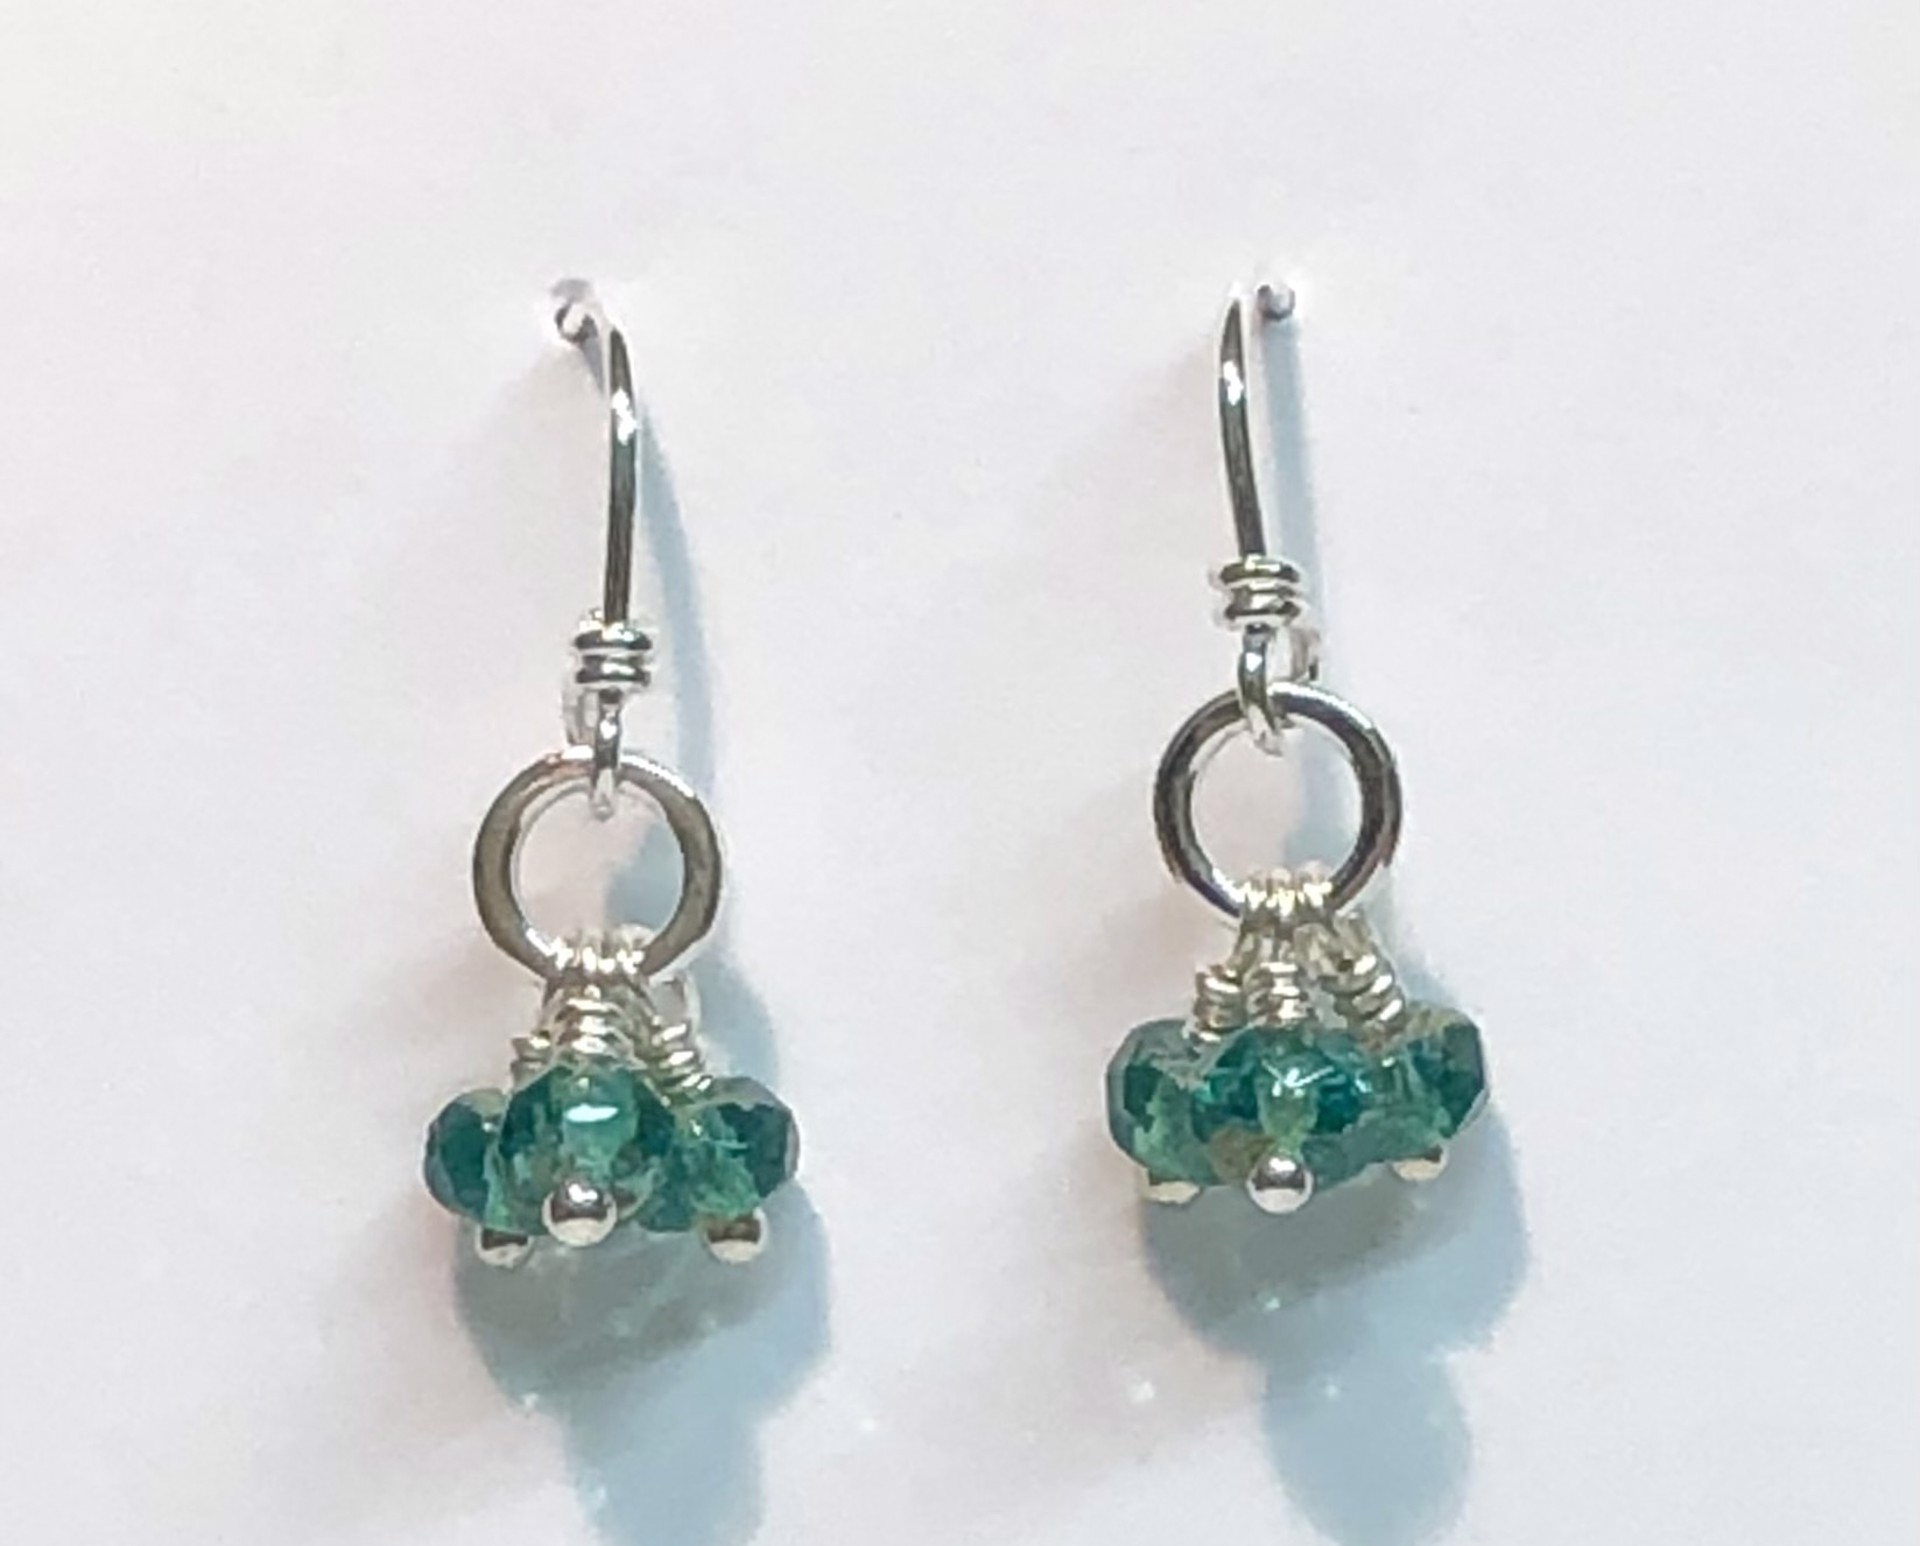 Green/Blue Czech with Small Ring Earrings, Sterling Silver by Amelia Whelan